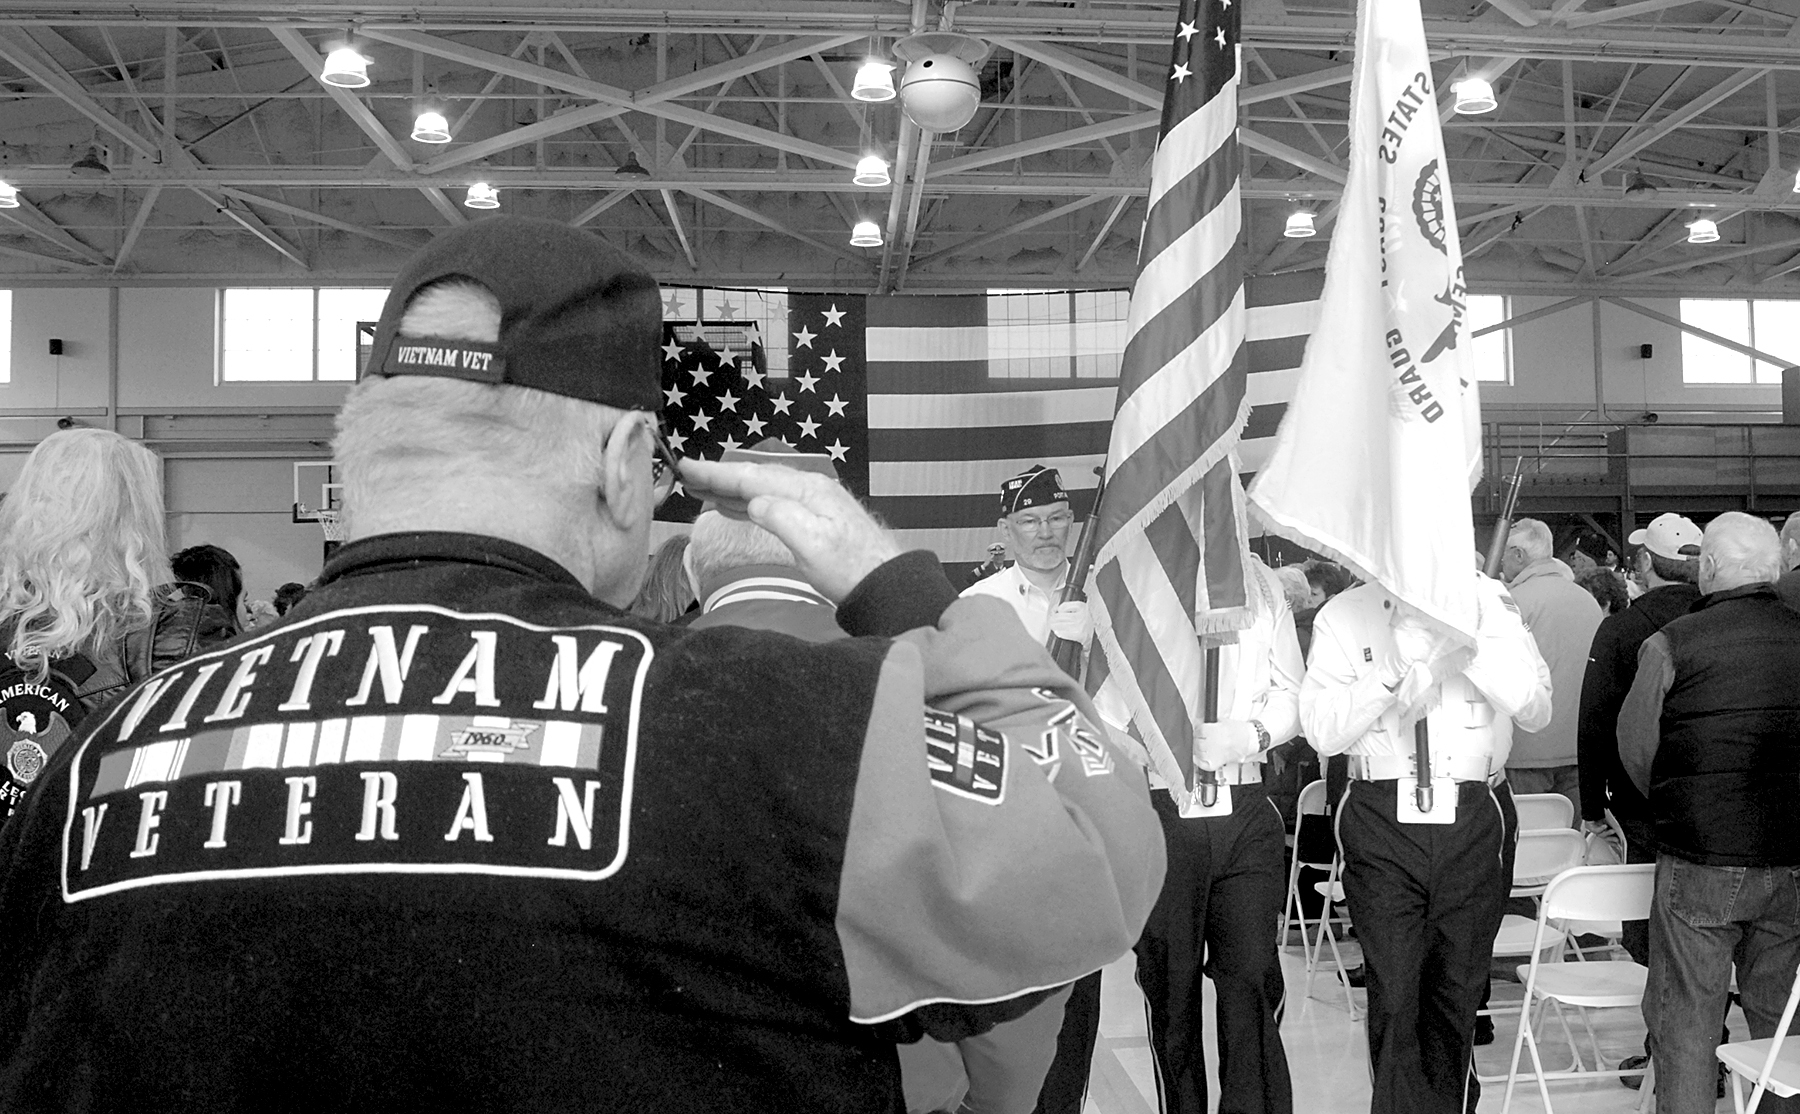 Mike Money of Port Angeles, a U.S. Navy veteran who served in Vietnam, salutes as a color guard passes during last Friday’s Veterans Day ceremony in the hangar of U.S. Coast Guard Air Station/Sector Field Office Port Port Angeles. (Keith Thorpe/Peninsula Daily News)